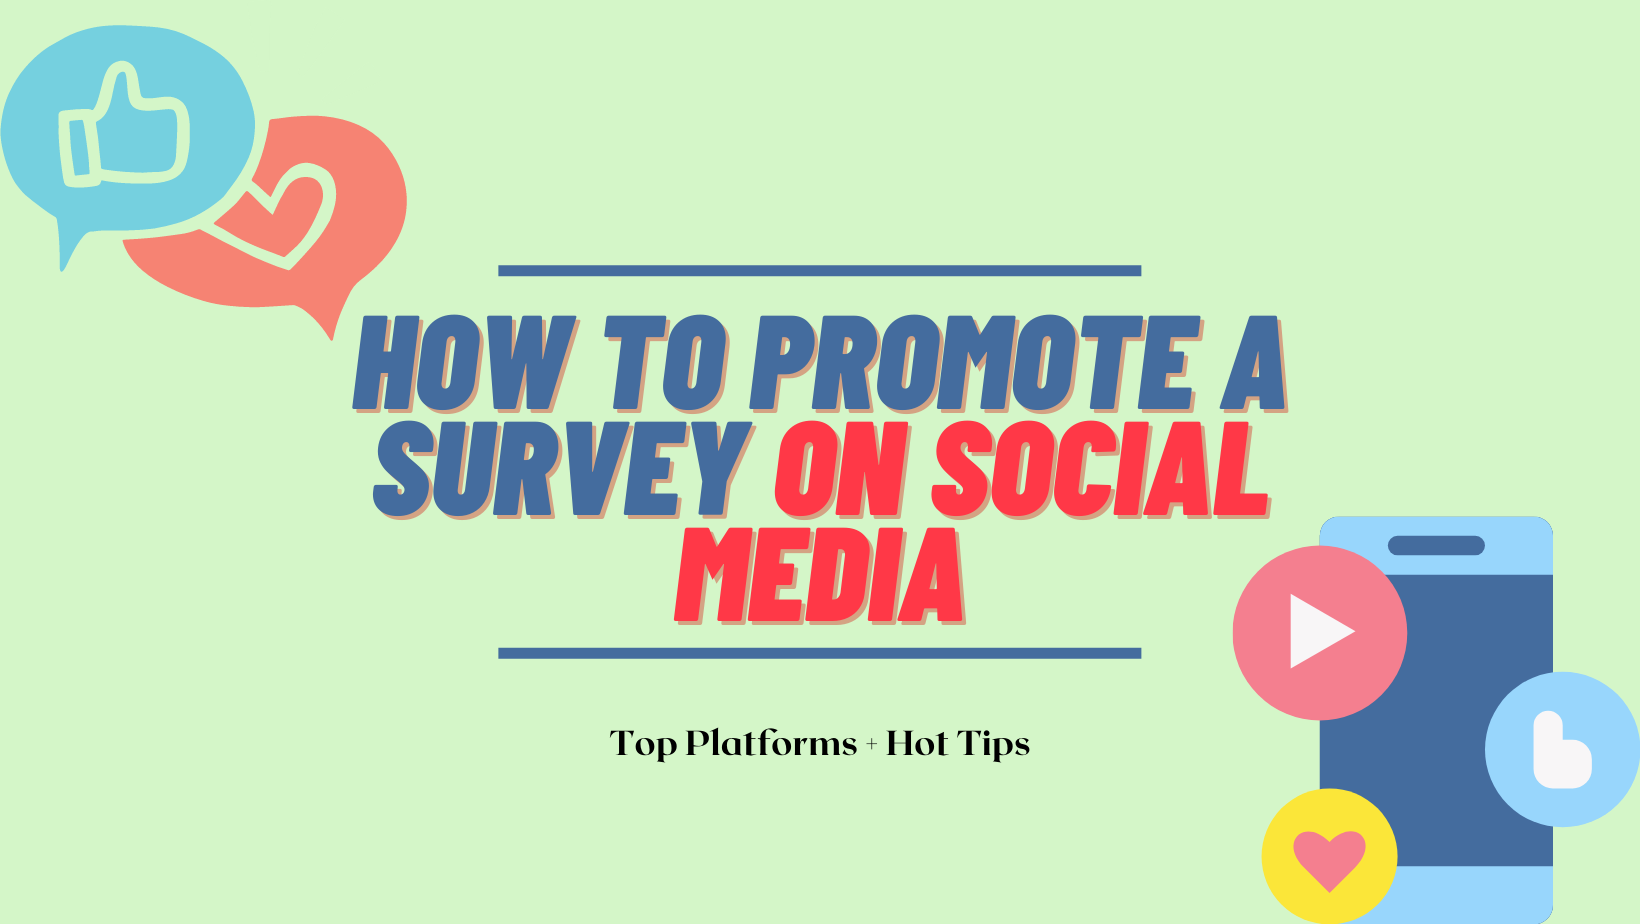 How To Promote a Survey on Social Media